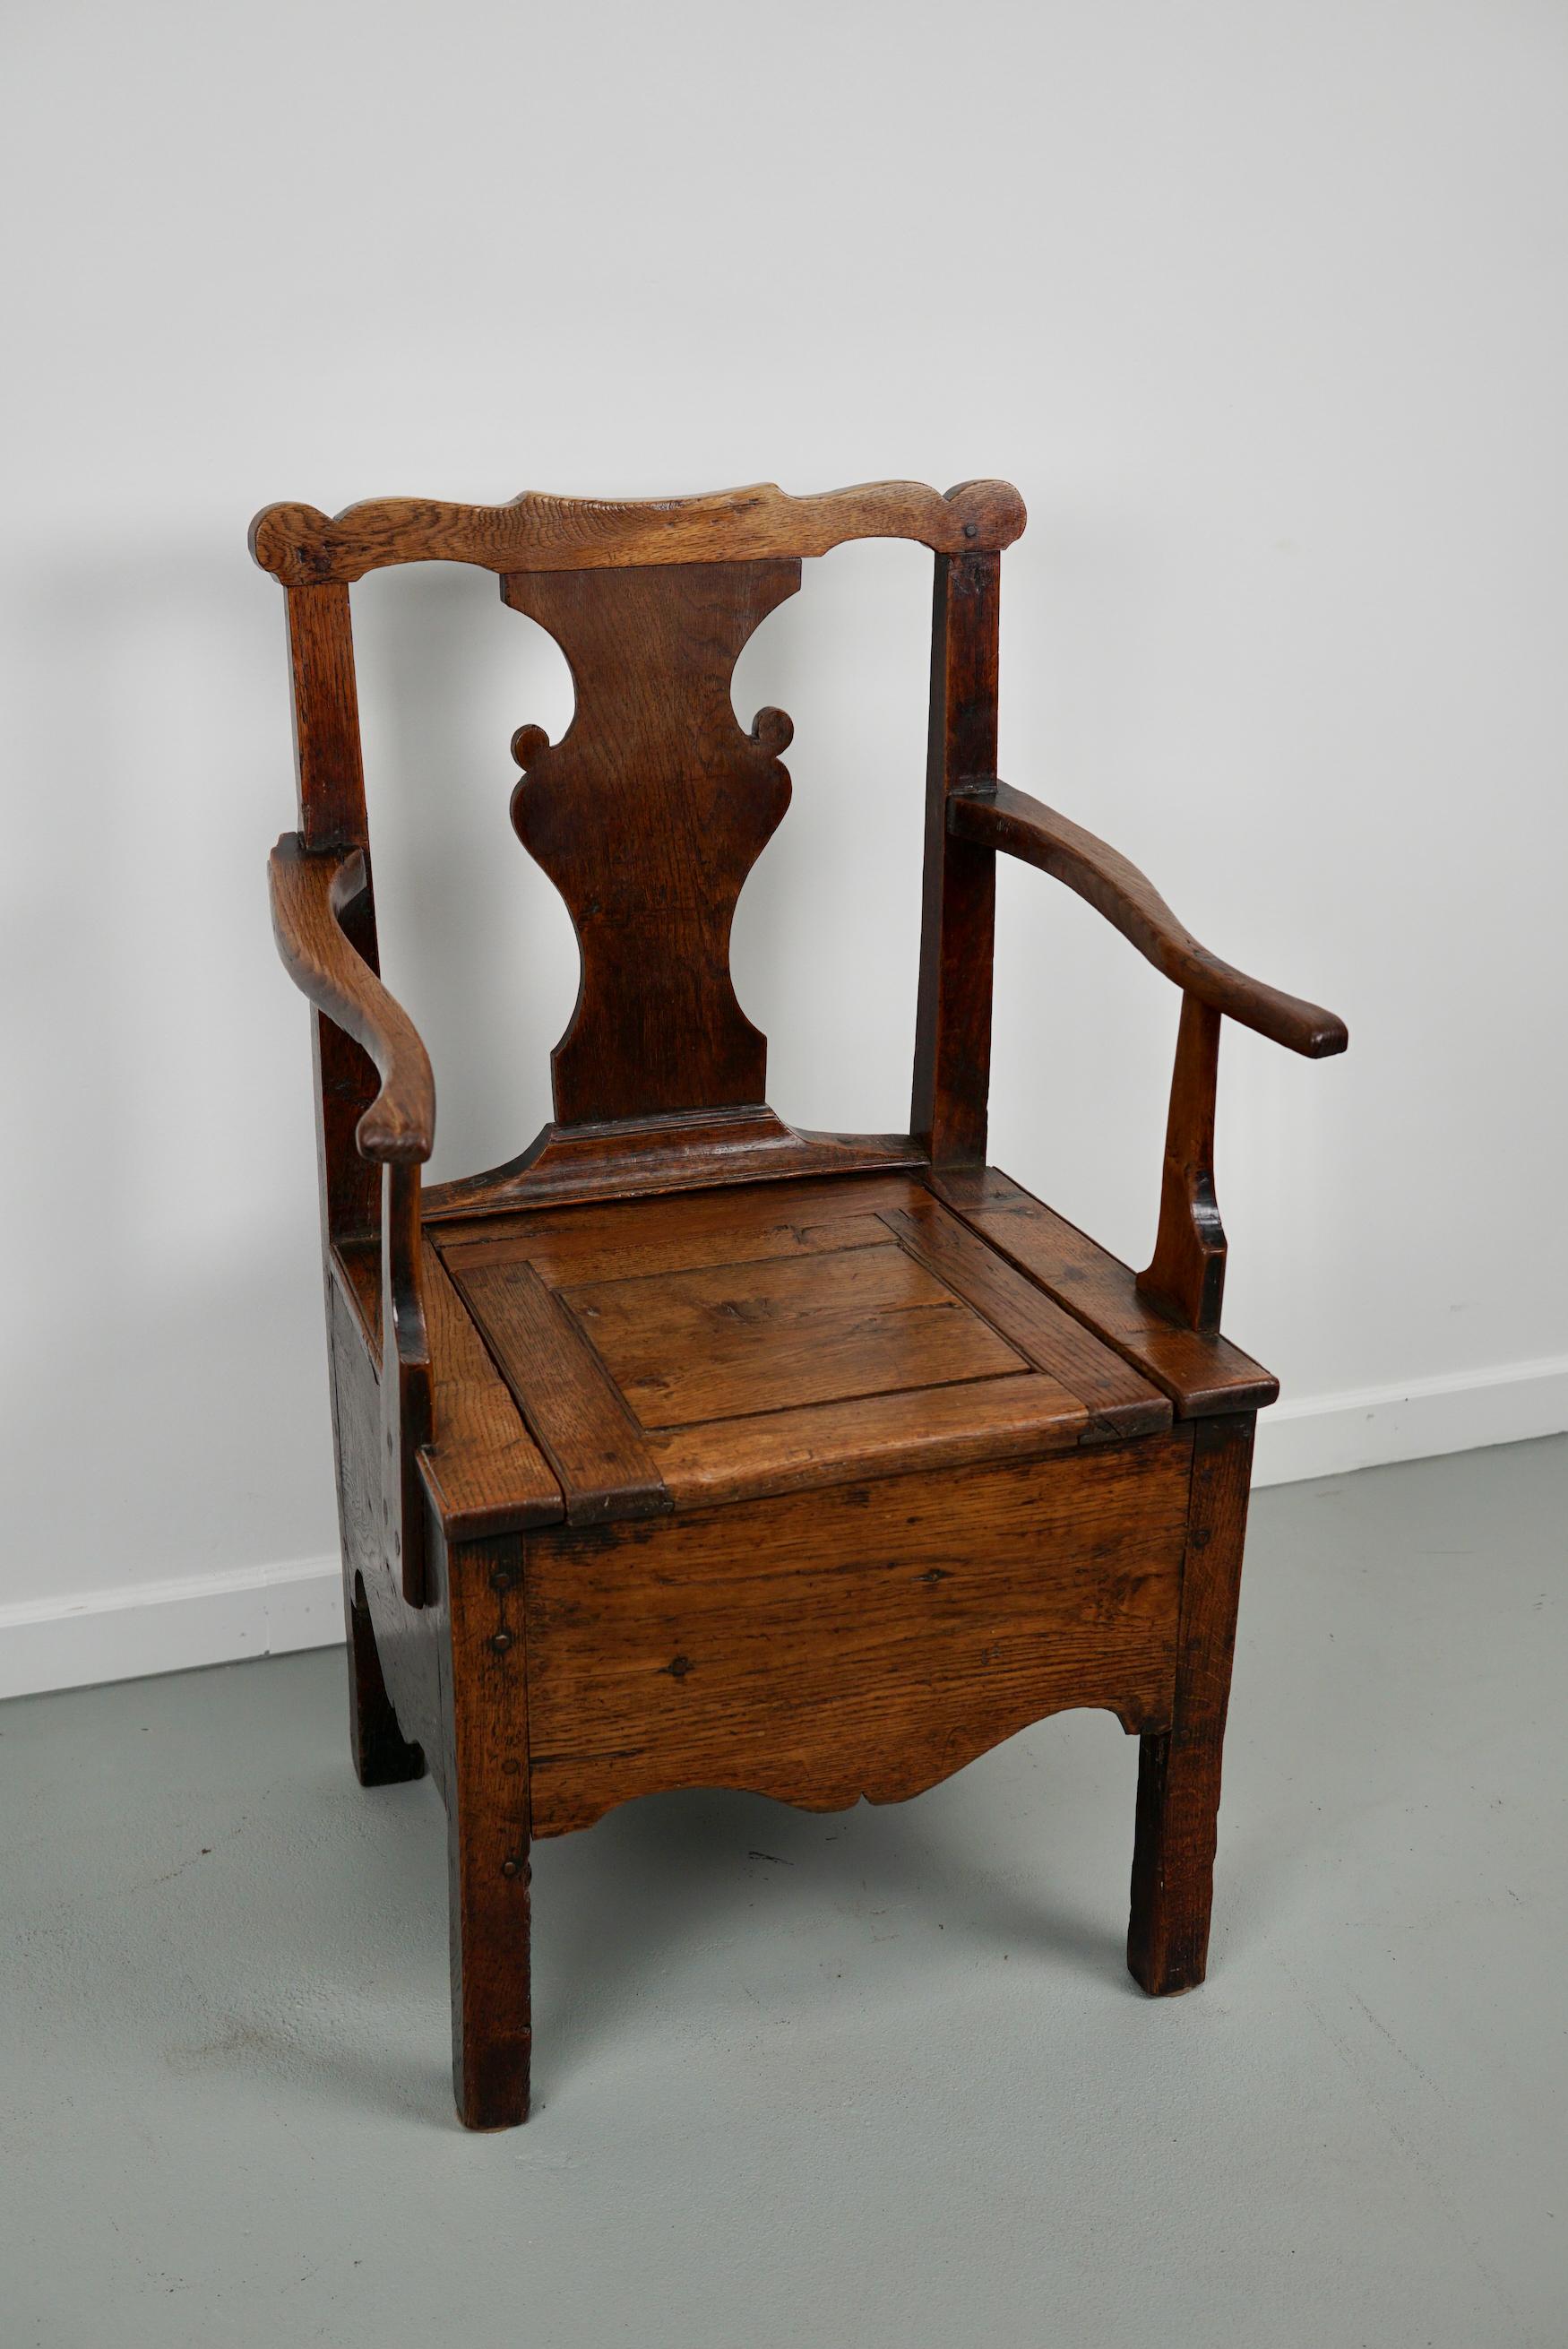 European Antique English Oak Commode Chair 18th Century For Sale